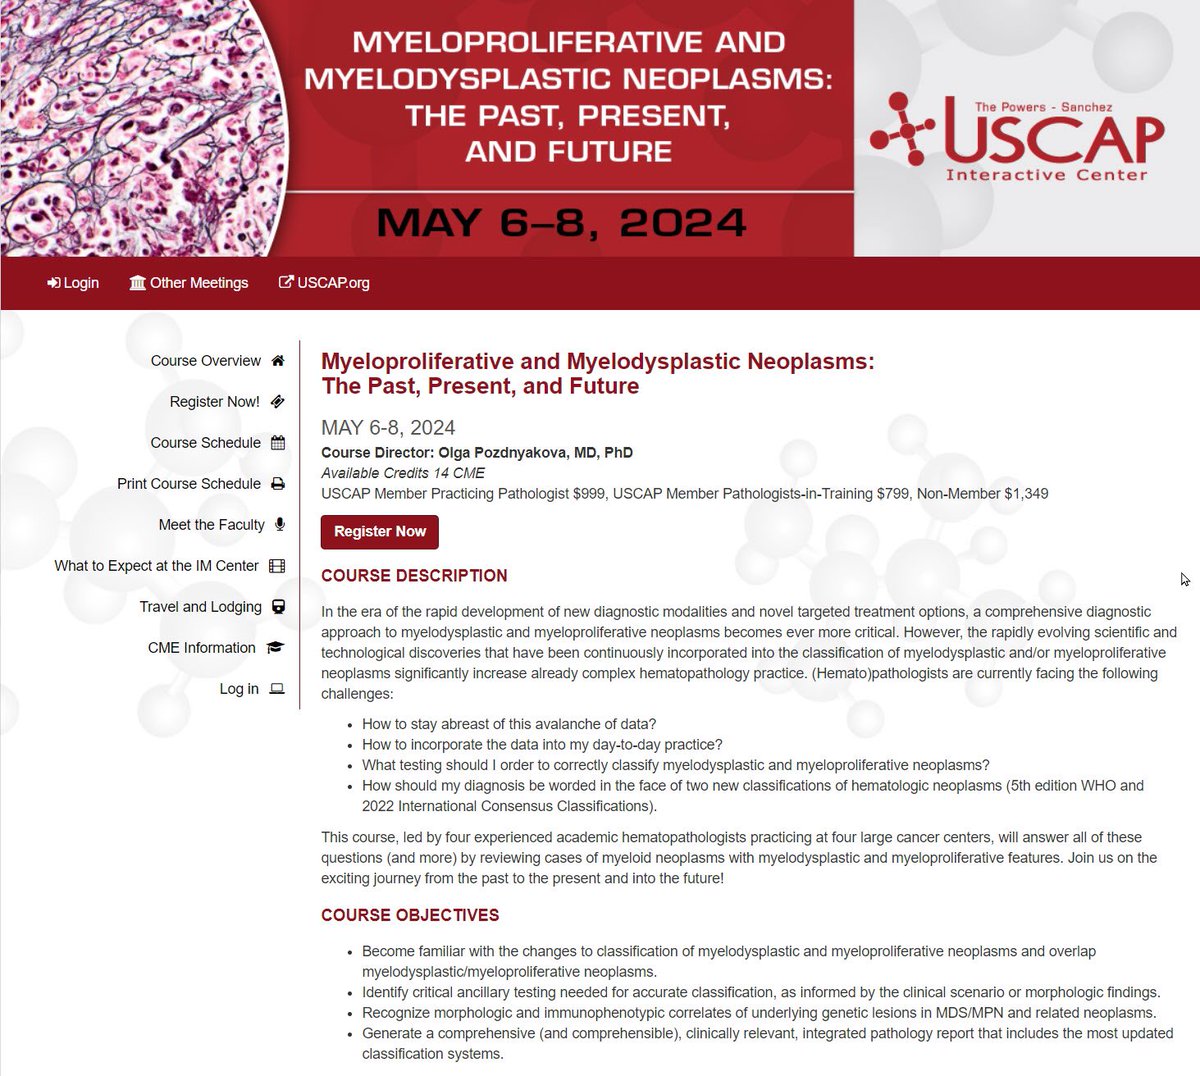 Interested in learning more about Myelodysplastic & Myeloproliferative neoplasms? Join us @TheUSCAP interactive microscopy course May 6-8 in #PalmSprings ☀️ Myself, Drs. O. Pozdnyakova, R. Hasserjian & E. Mason will be teaching the course. The cases are spectacular .. if I may…